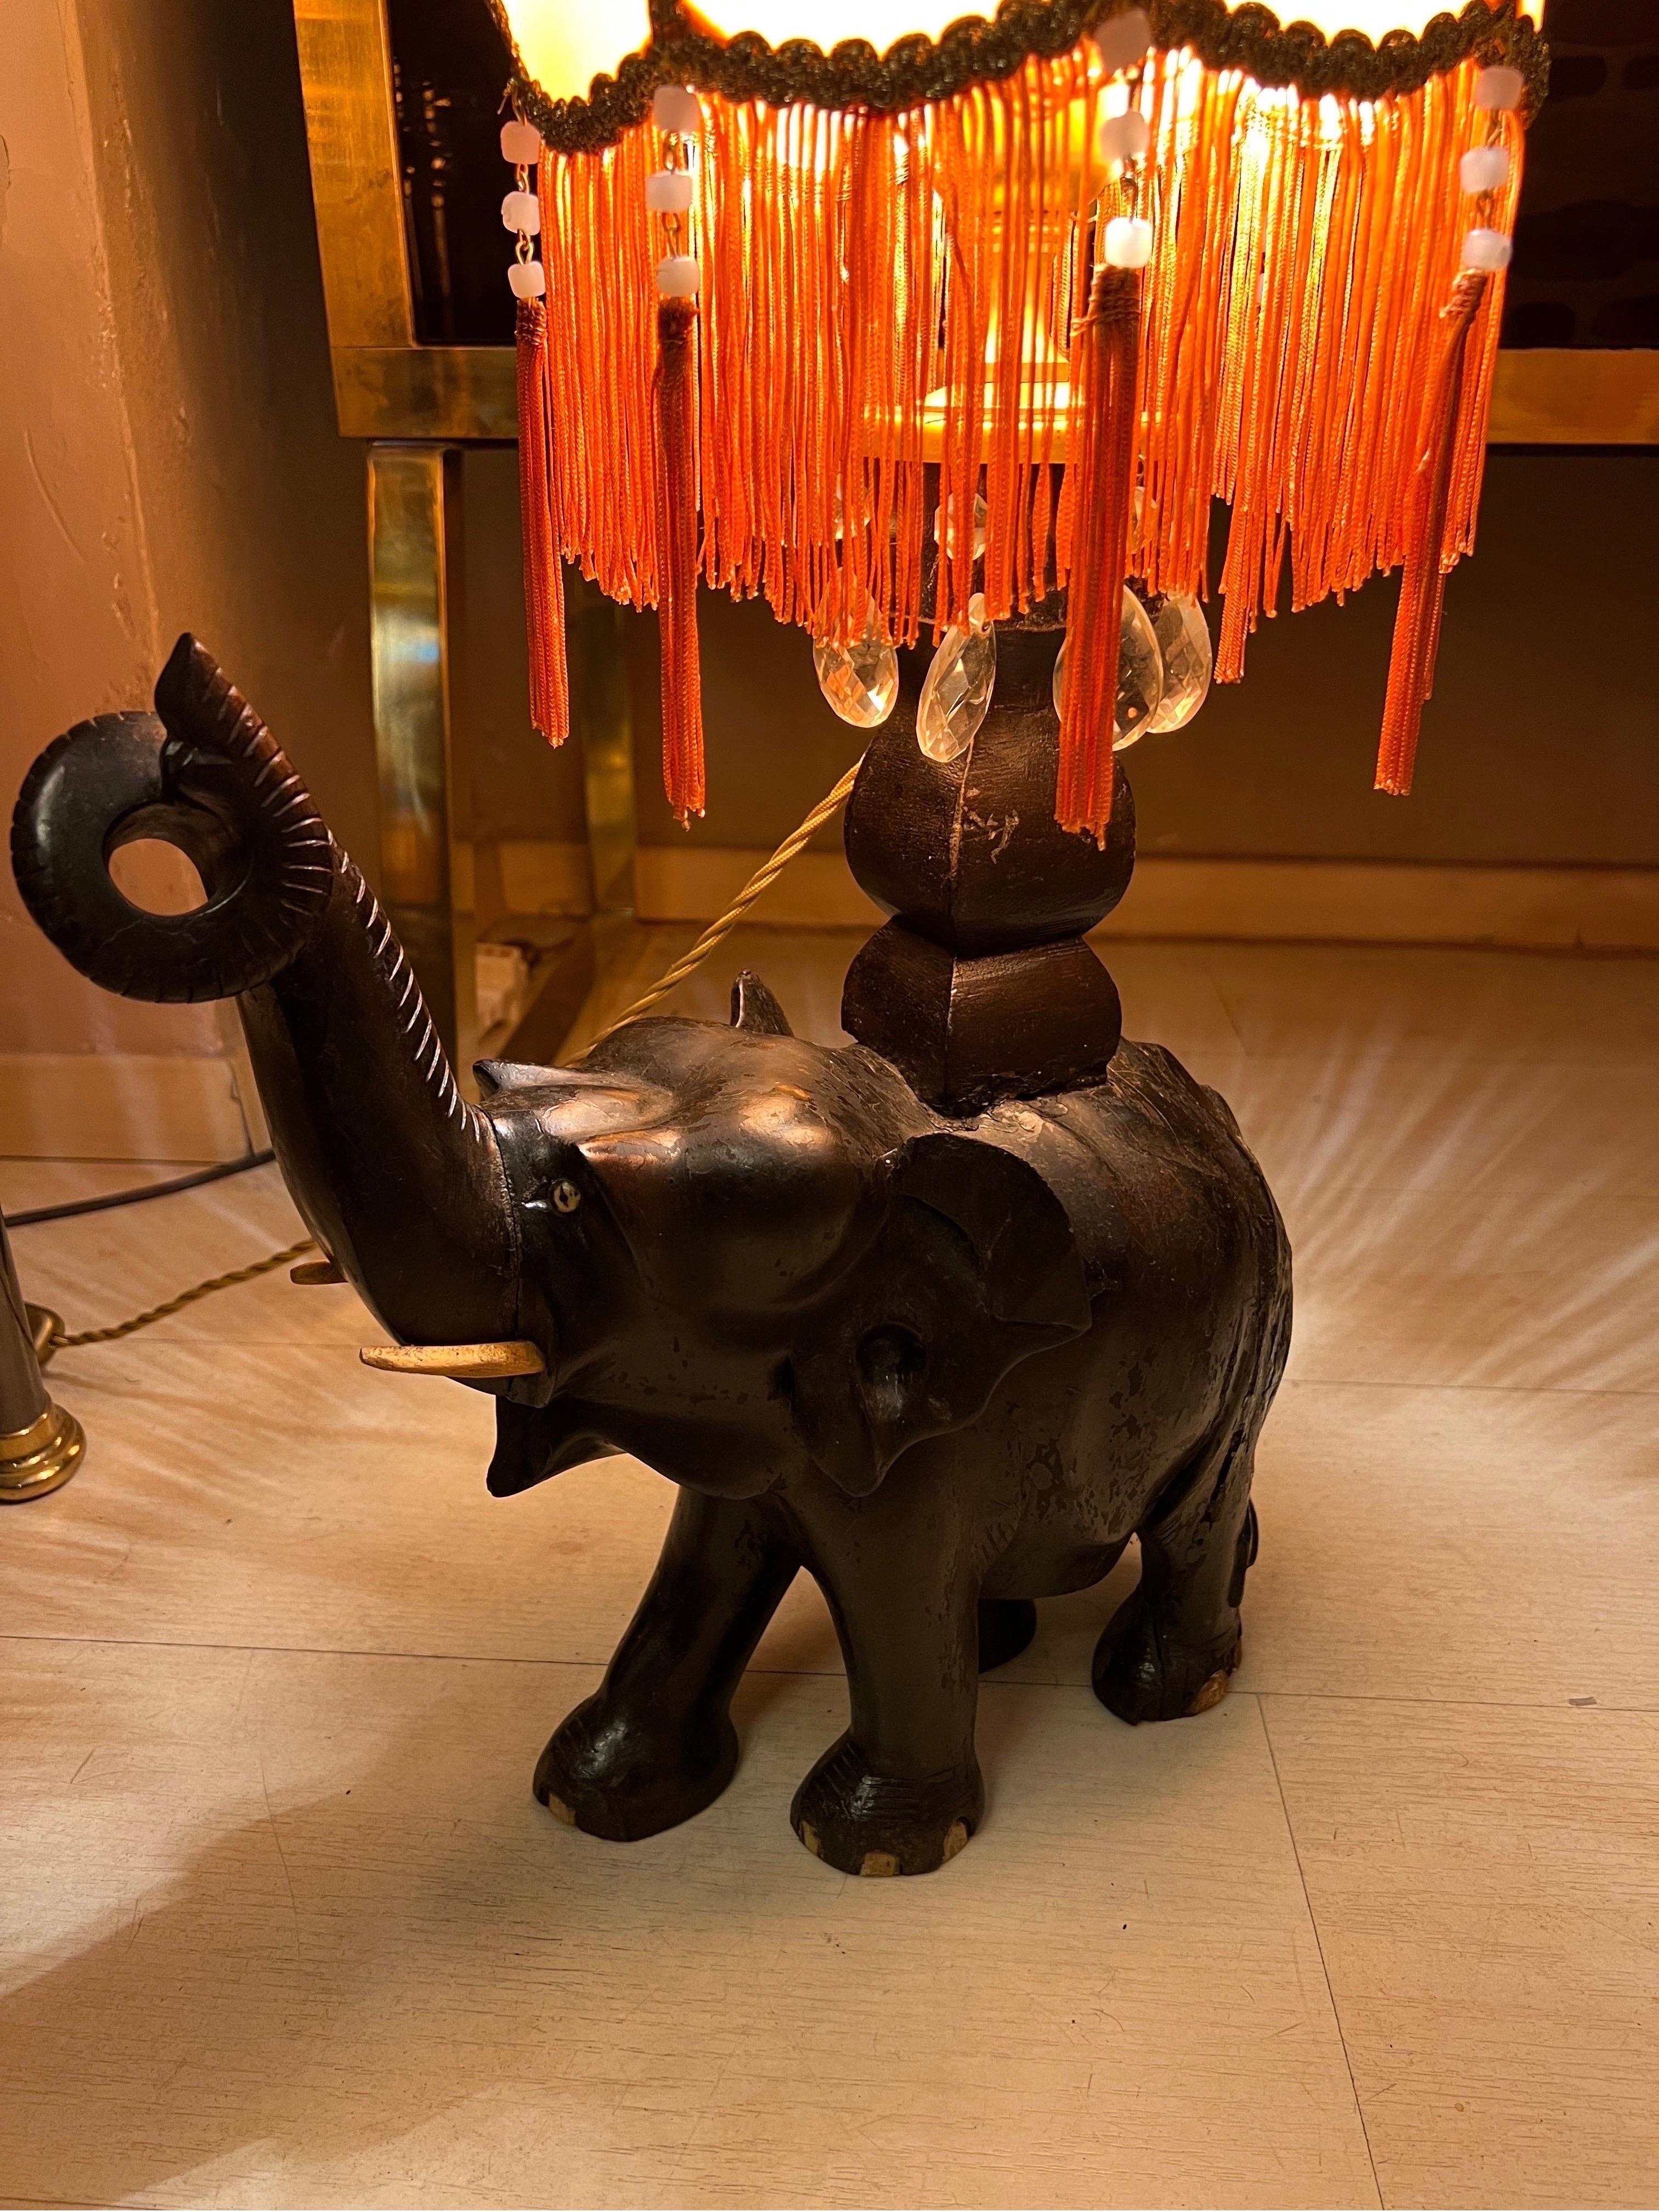 Pair of Ebony Elephants Table Lamps with Orange Lampshades and Fringes, 1920s 11